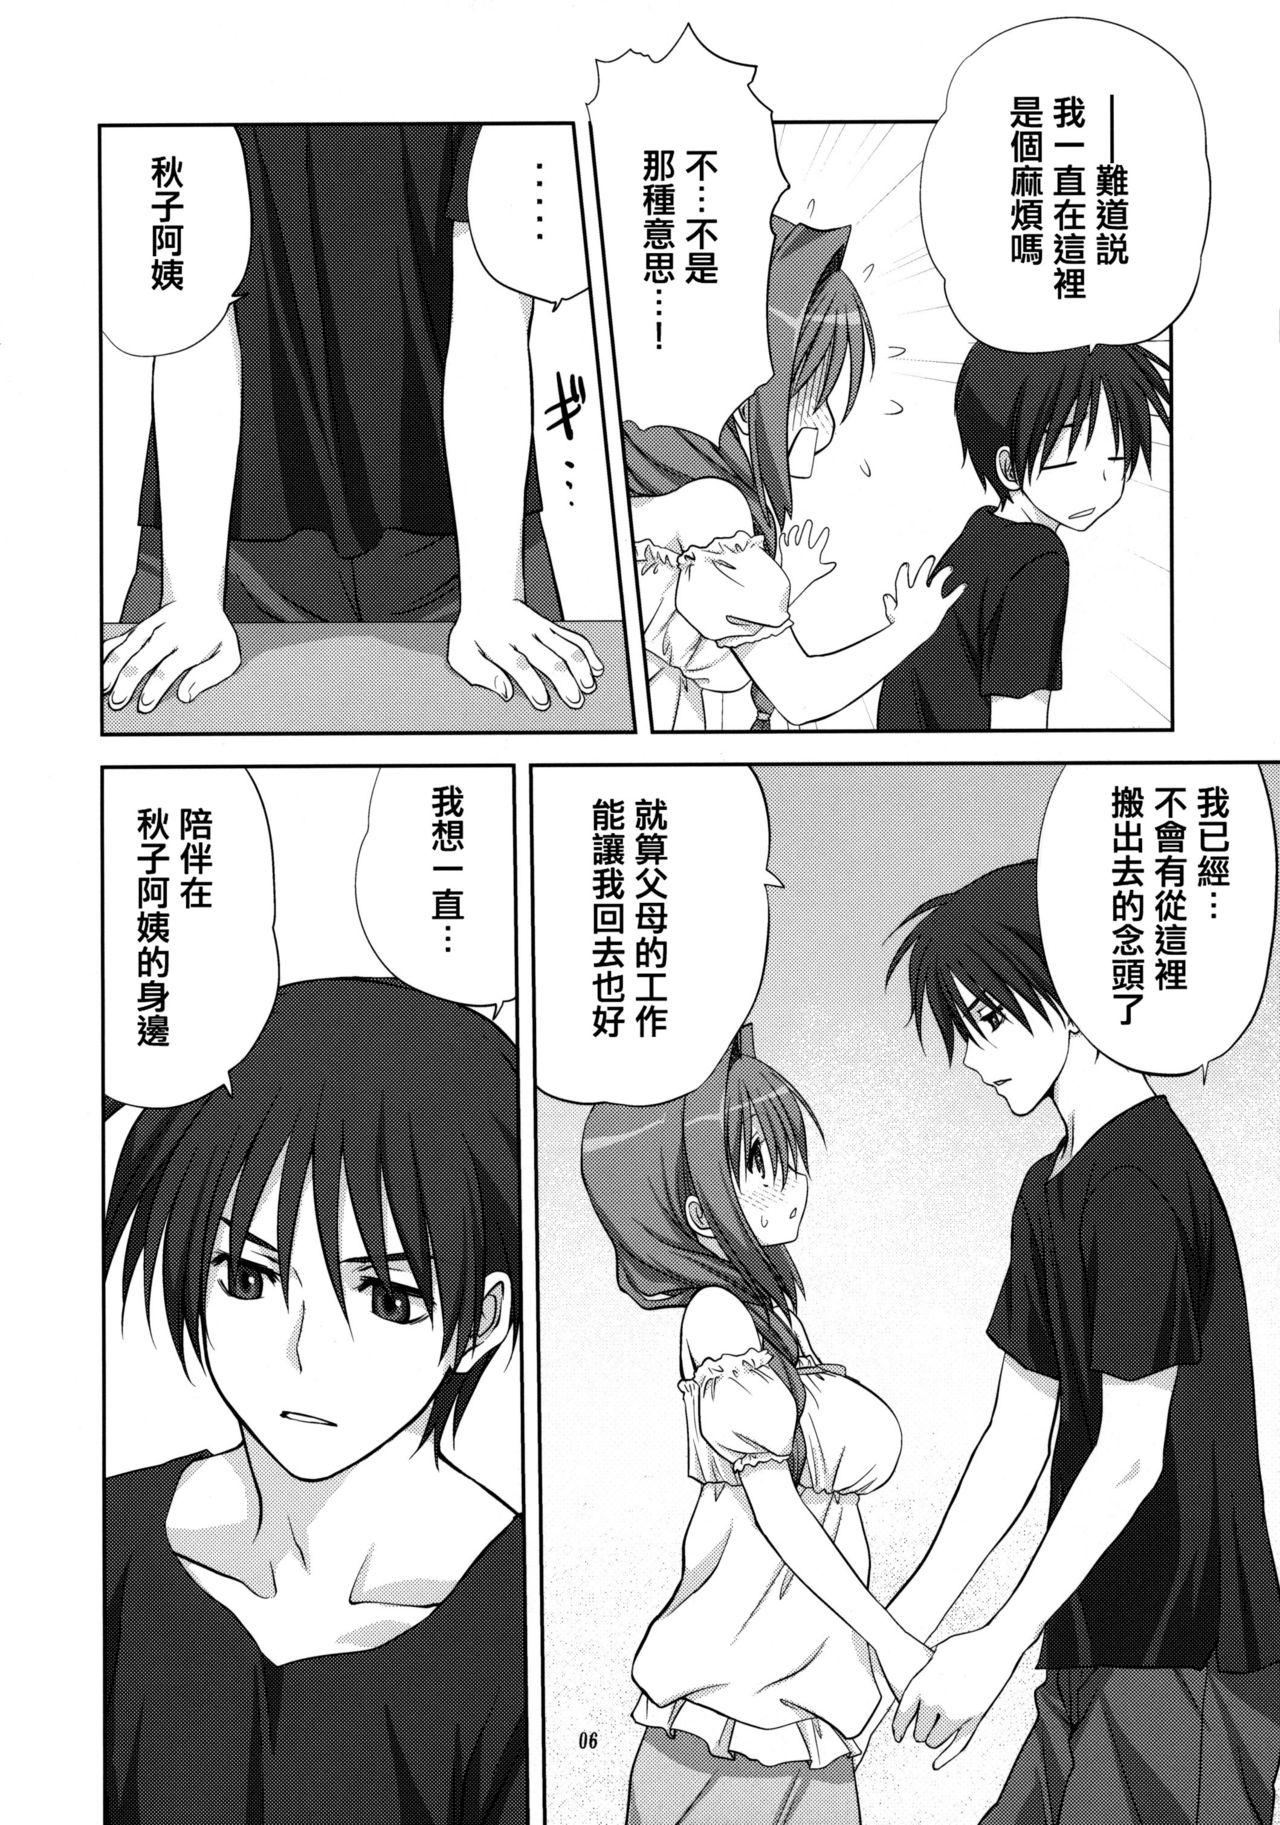 Old Young Akiko-san to Issho 8 - Kanon Work - Page 5